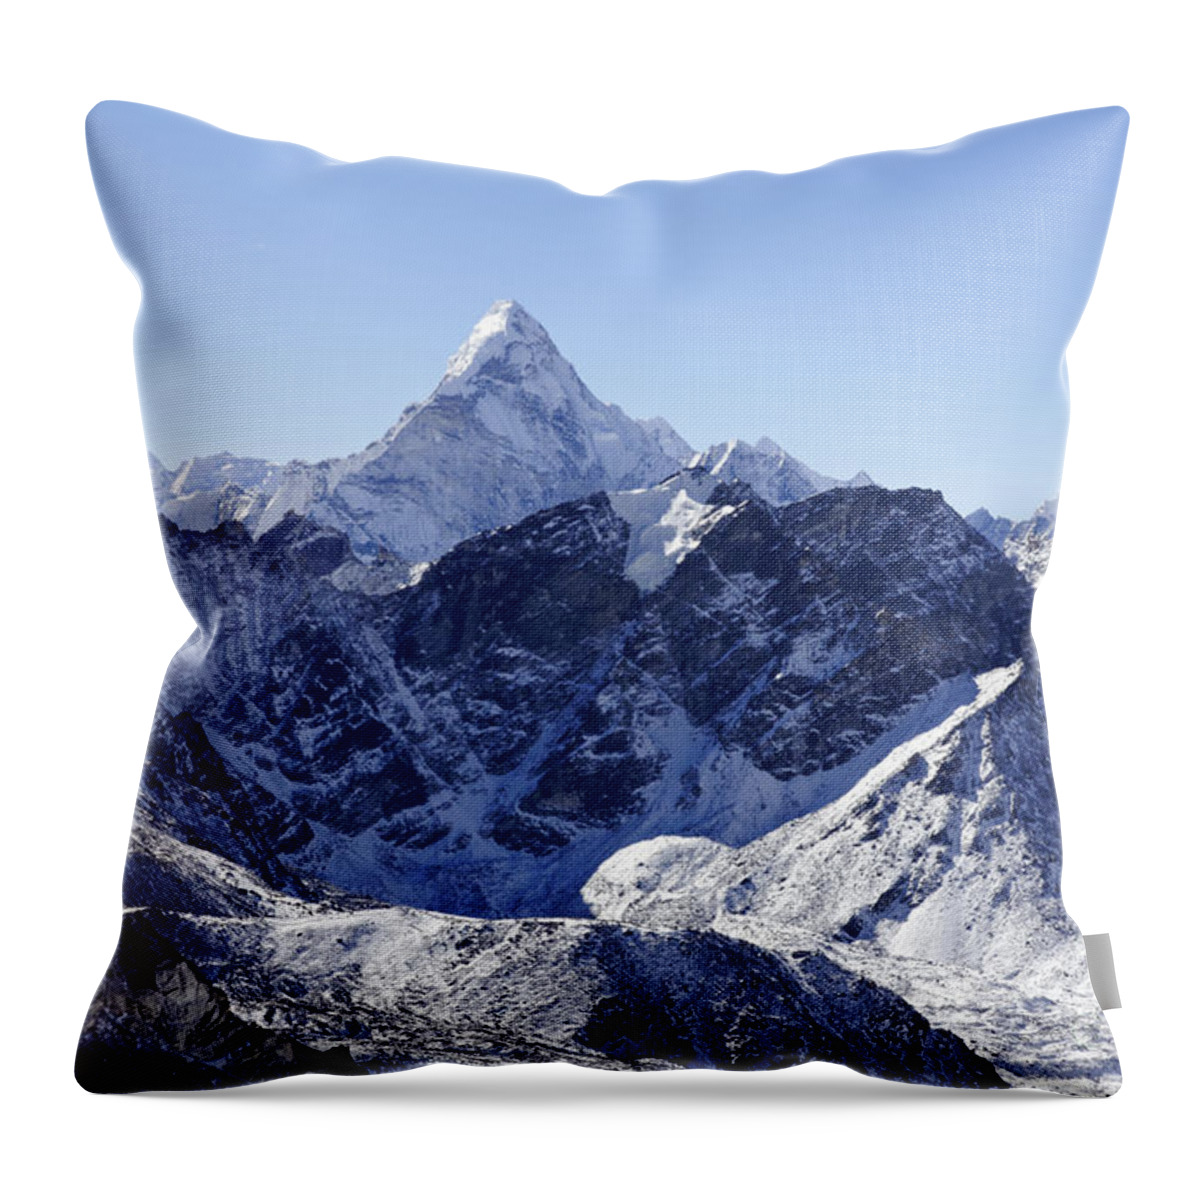 Ama Dablam Throw Pillow featuring the photograph Ama Dablam mountain seen from the summit of Kala Pathar in the Everest Region of Nepal by Robert Preston